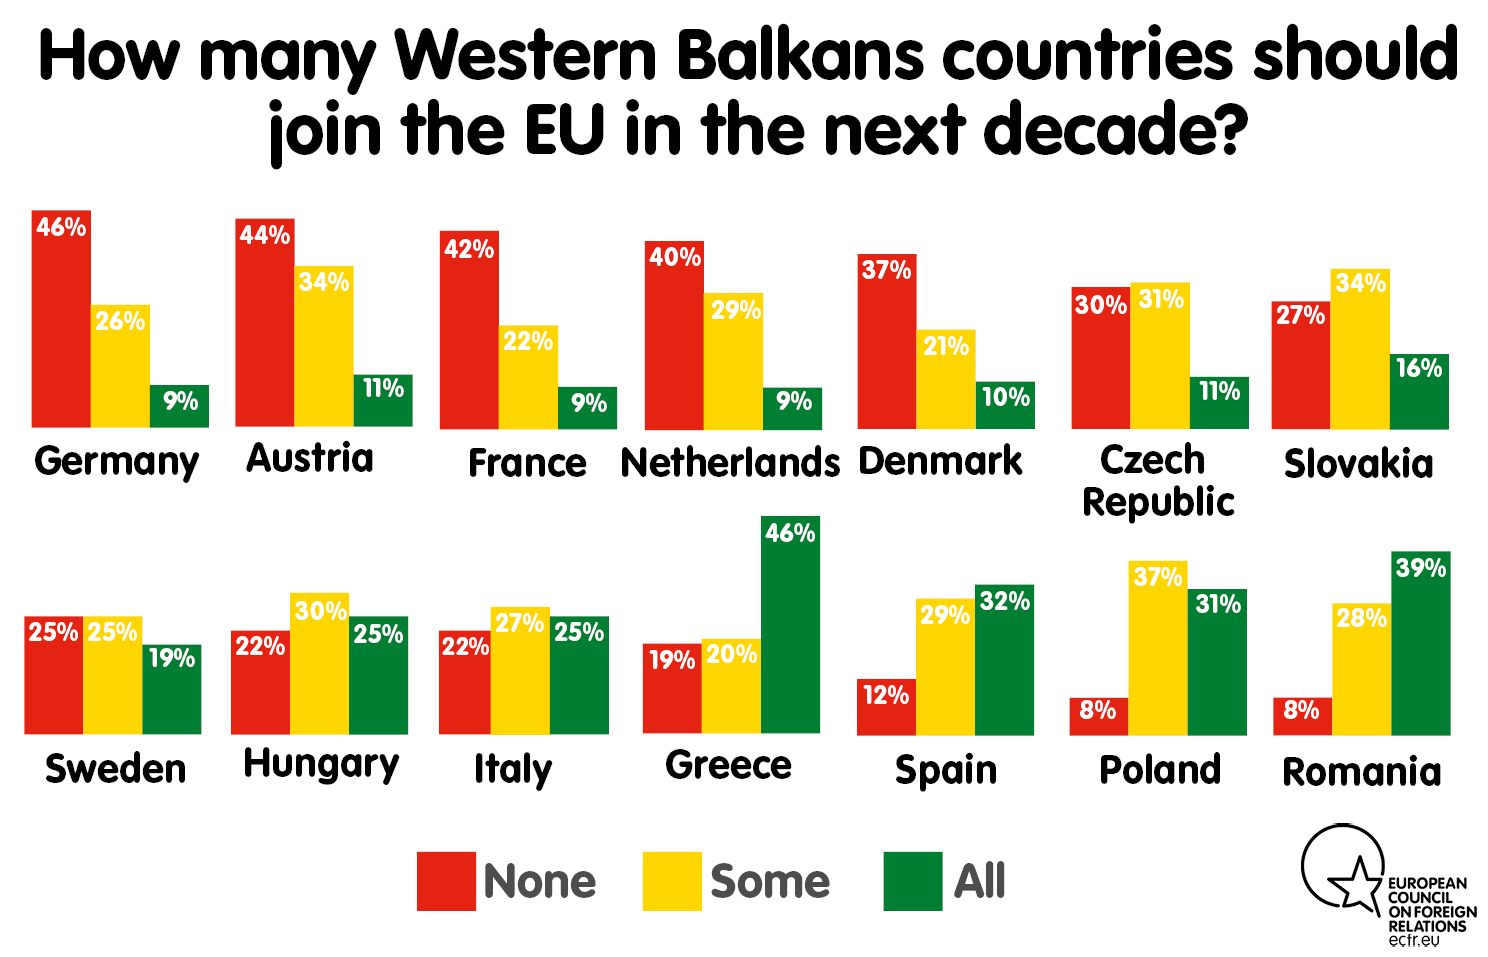 How many Western Balkans countries should join the EU in the next decade?